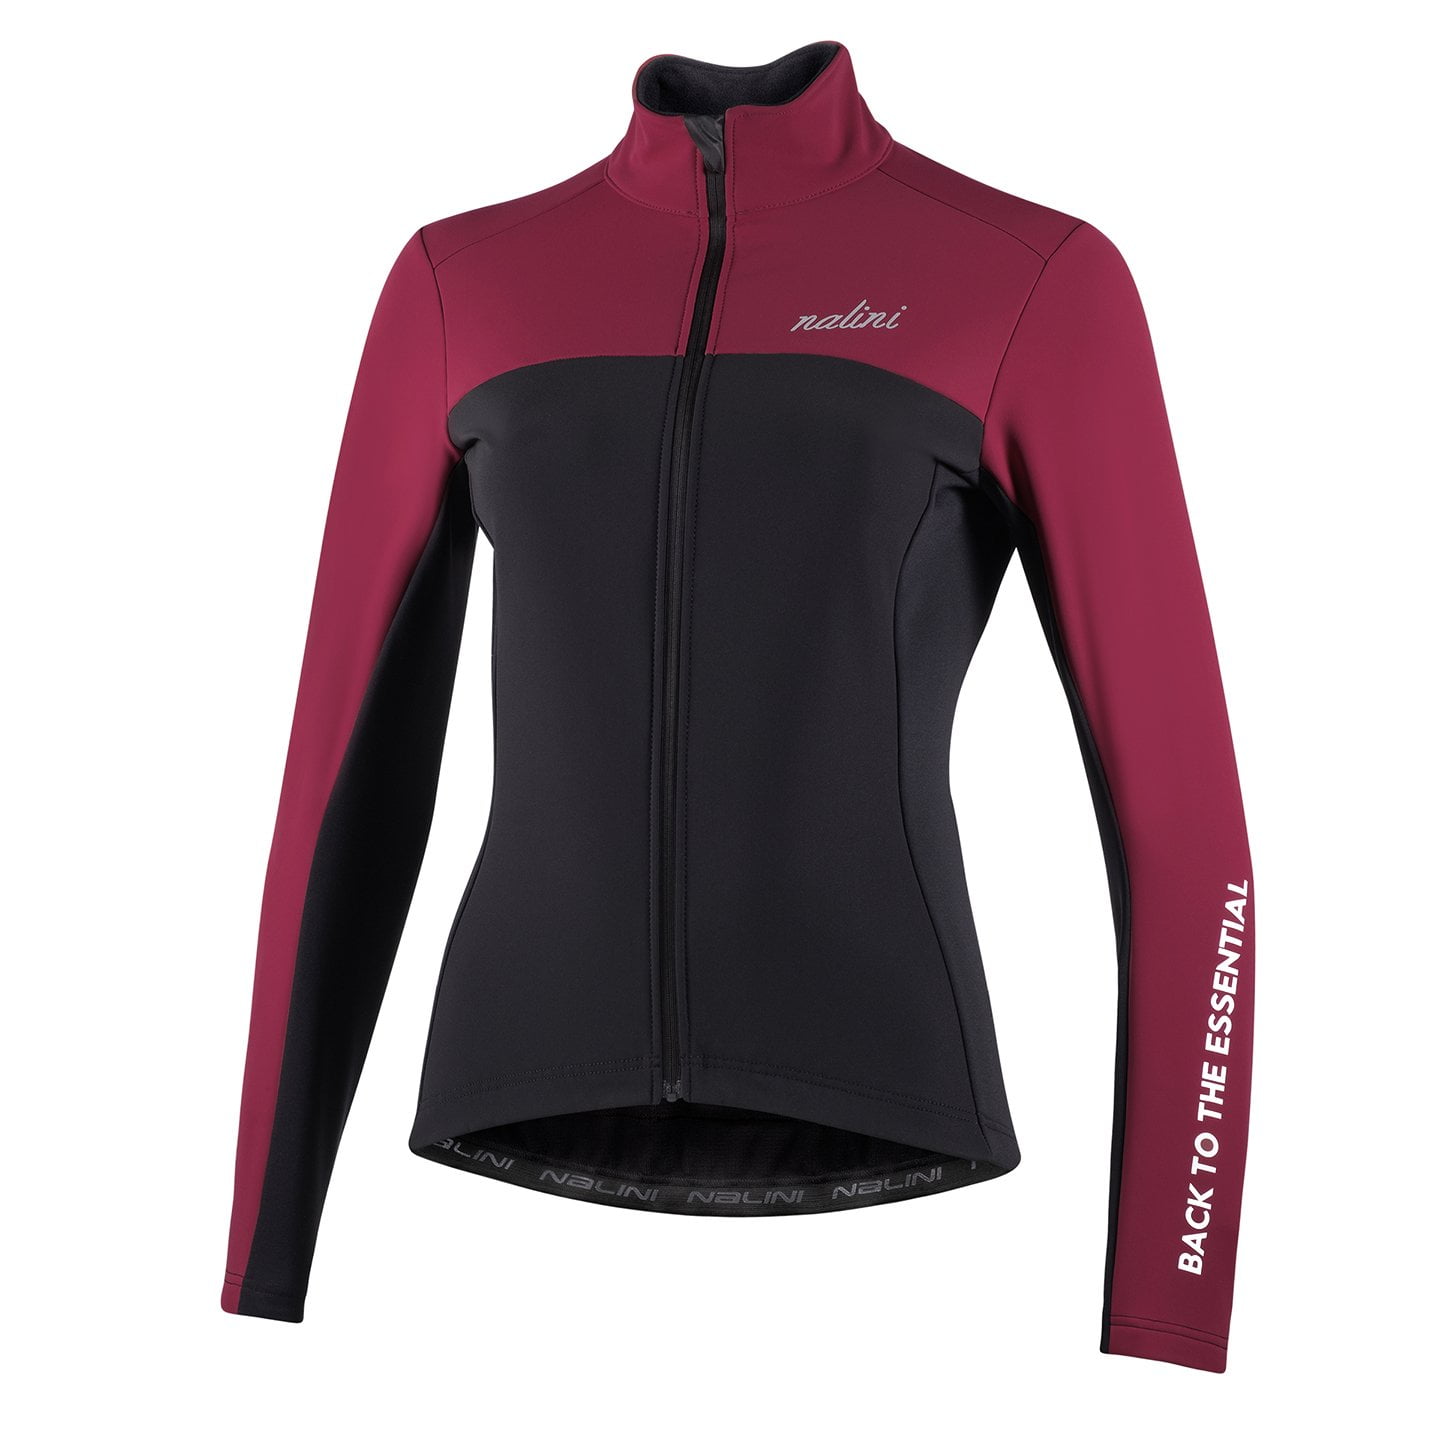 NALINI New Road Women’s Winter Jacket Women’s Thermal Jacket, size XL, Winter jacket, Cycling clothes